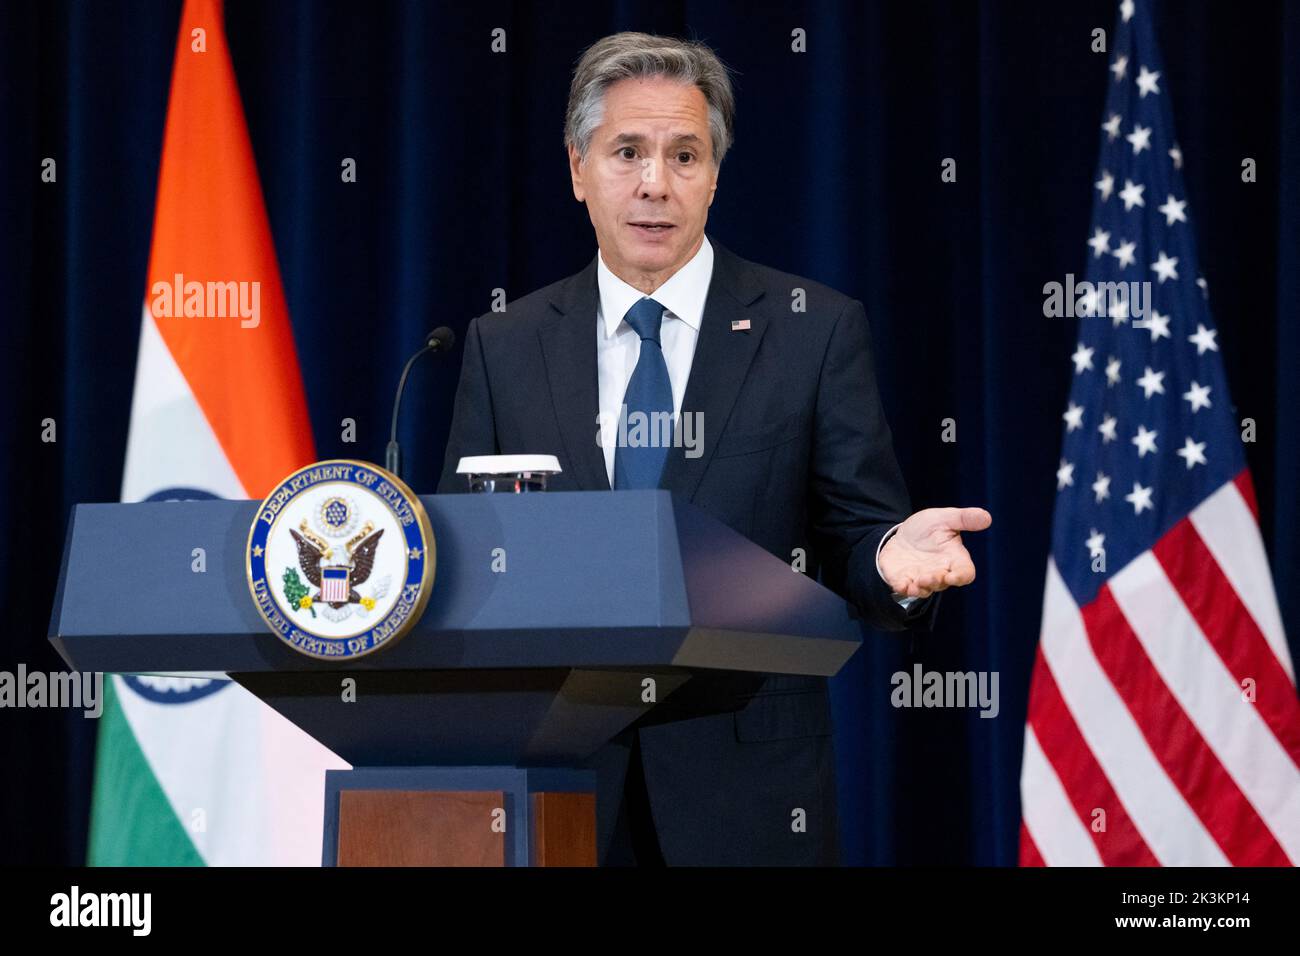 U.S. Secretary of State Antony Blinken speaks during a press conference with India's Foreign Minister Subrahmanyam Jaishankar at the State Department in Washington, U.S., September 27, 2022. Saul Loeb/Pool via REUTERS Stock Photo